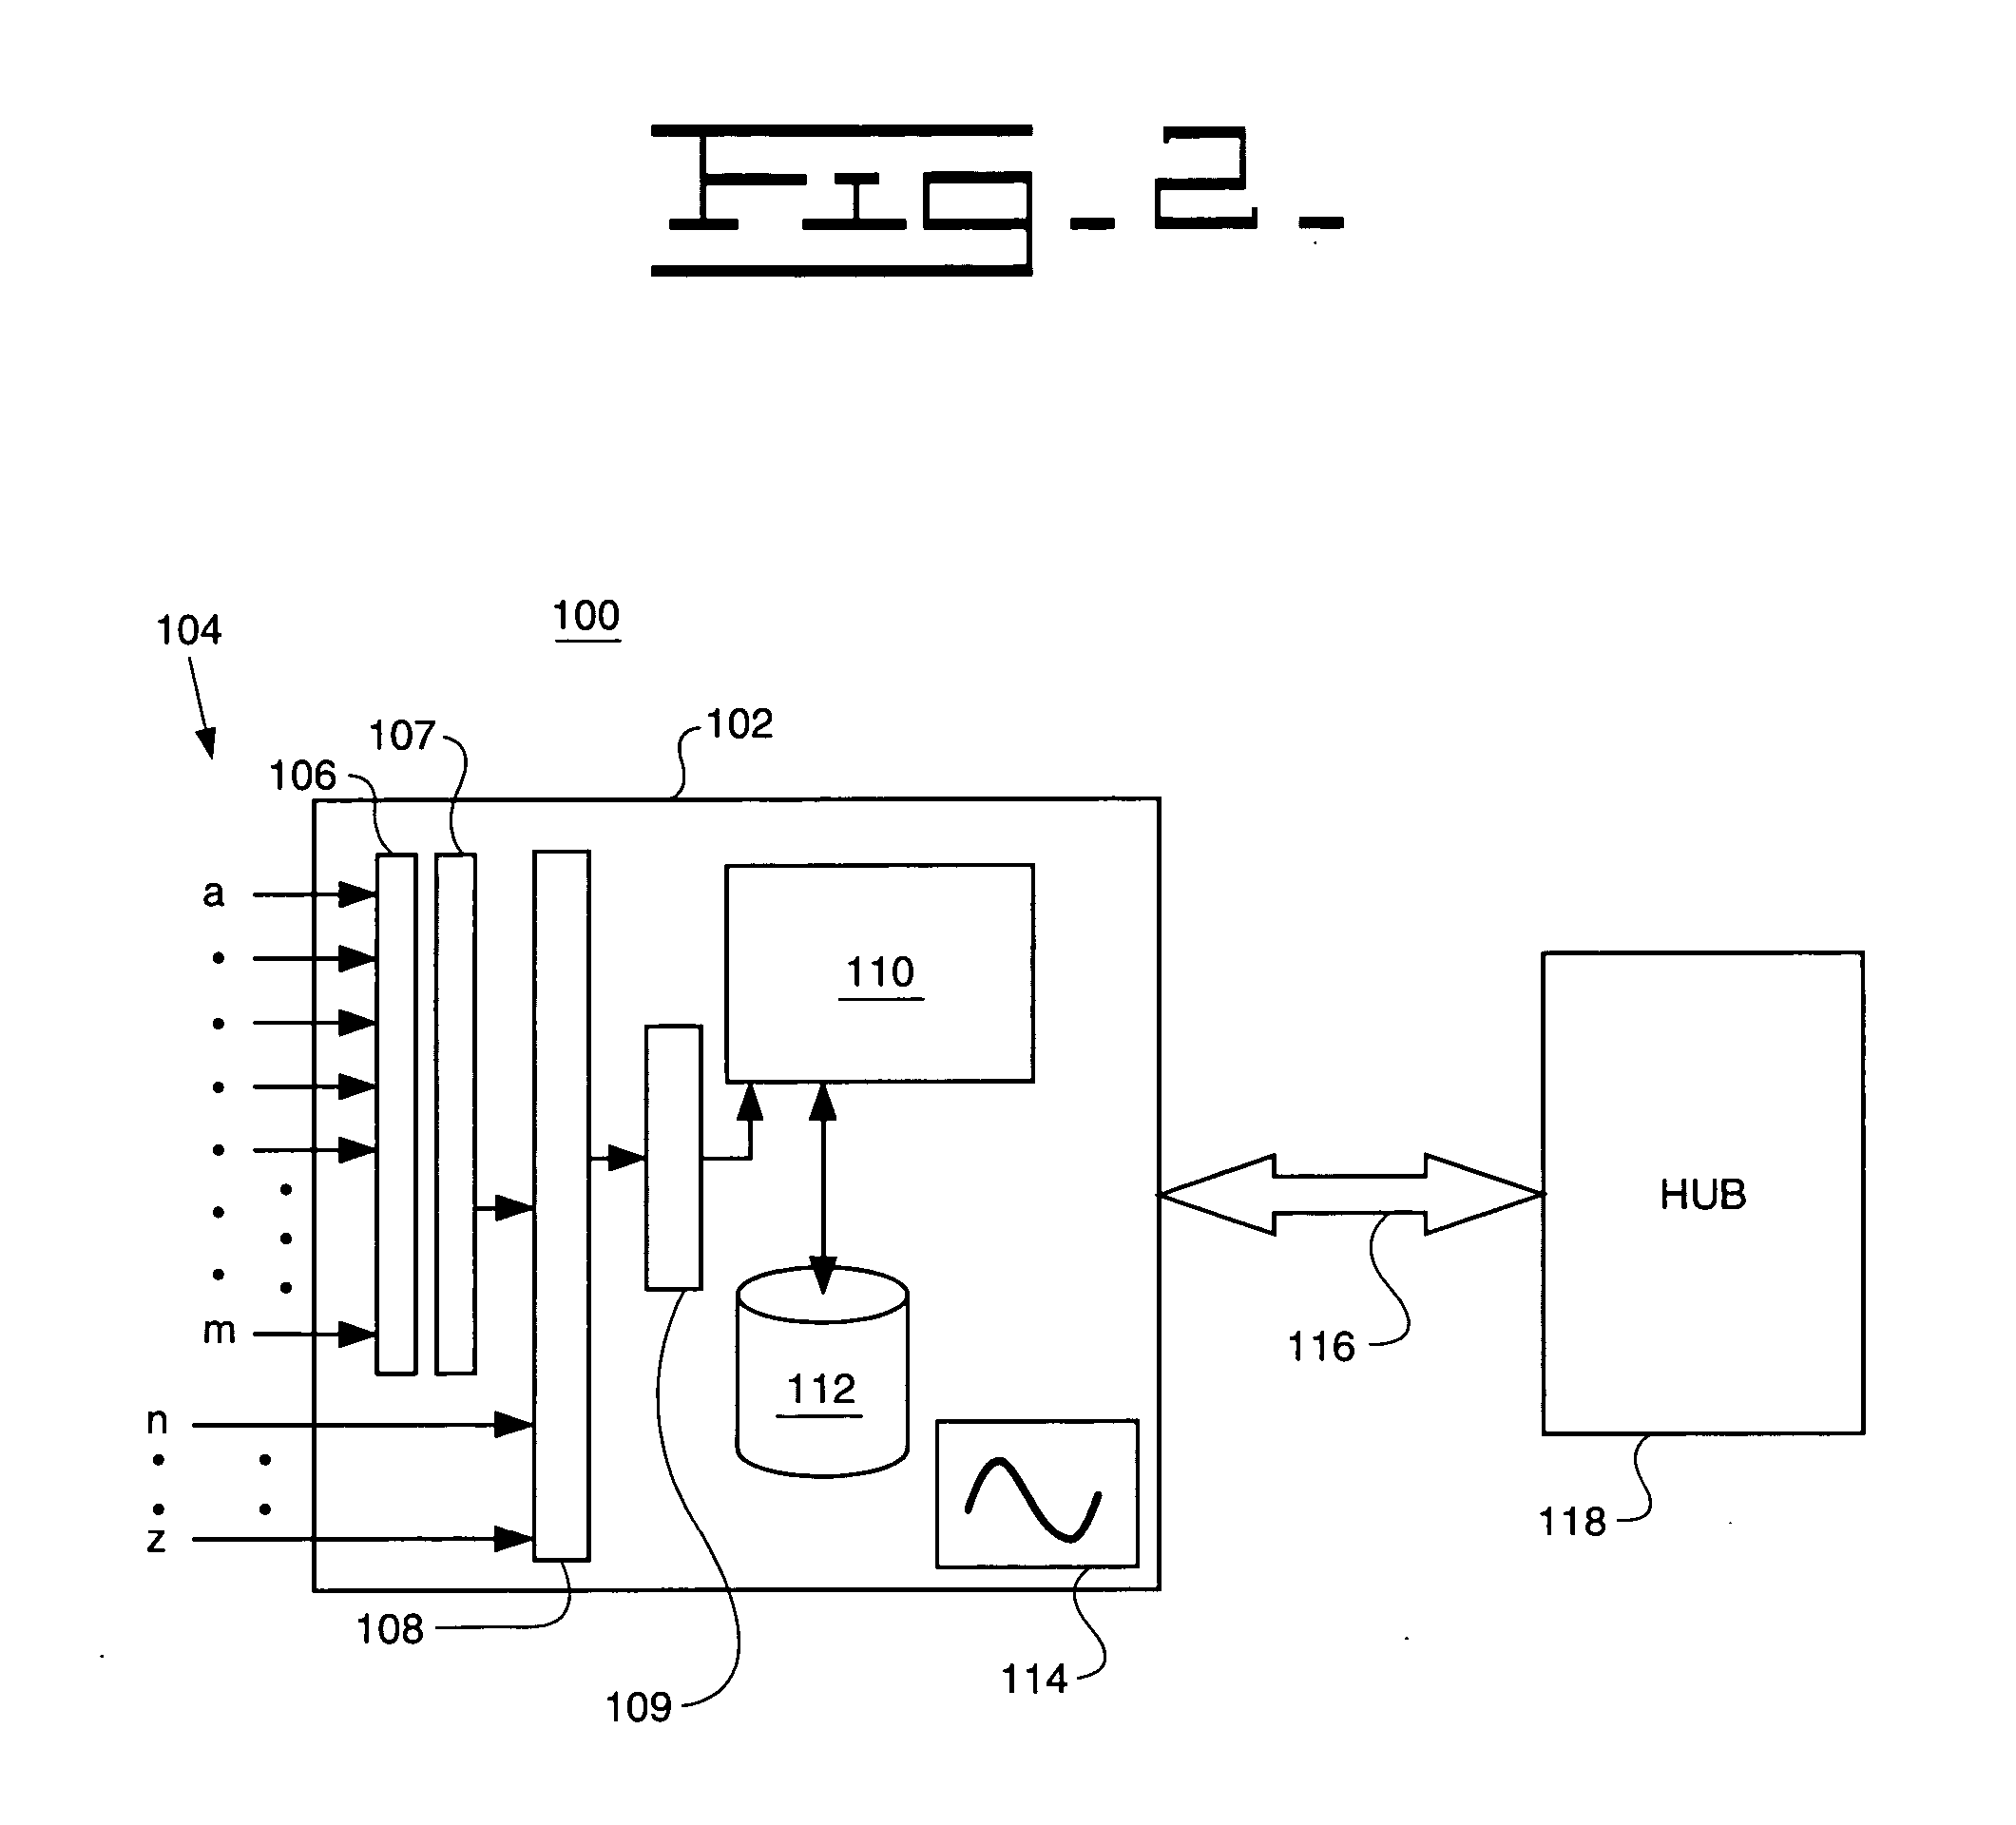 Vibration analysis system and method for a machine